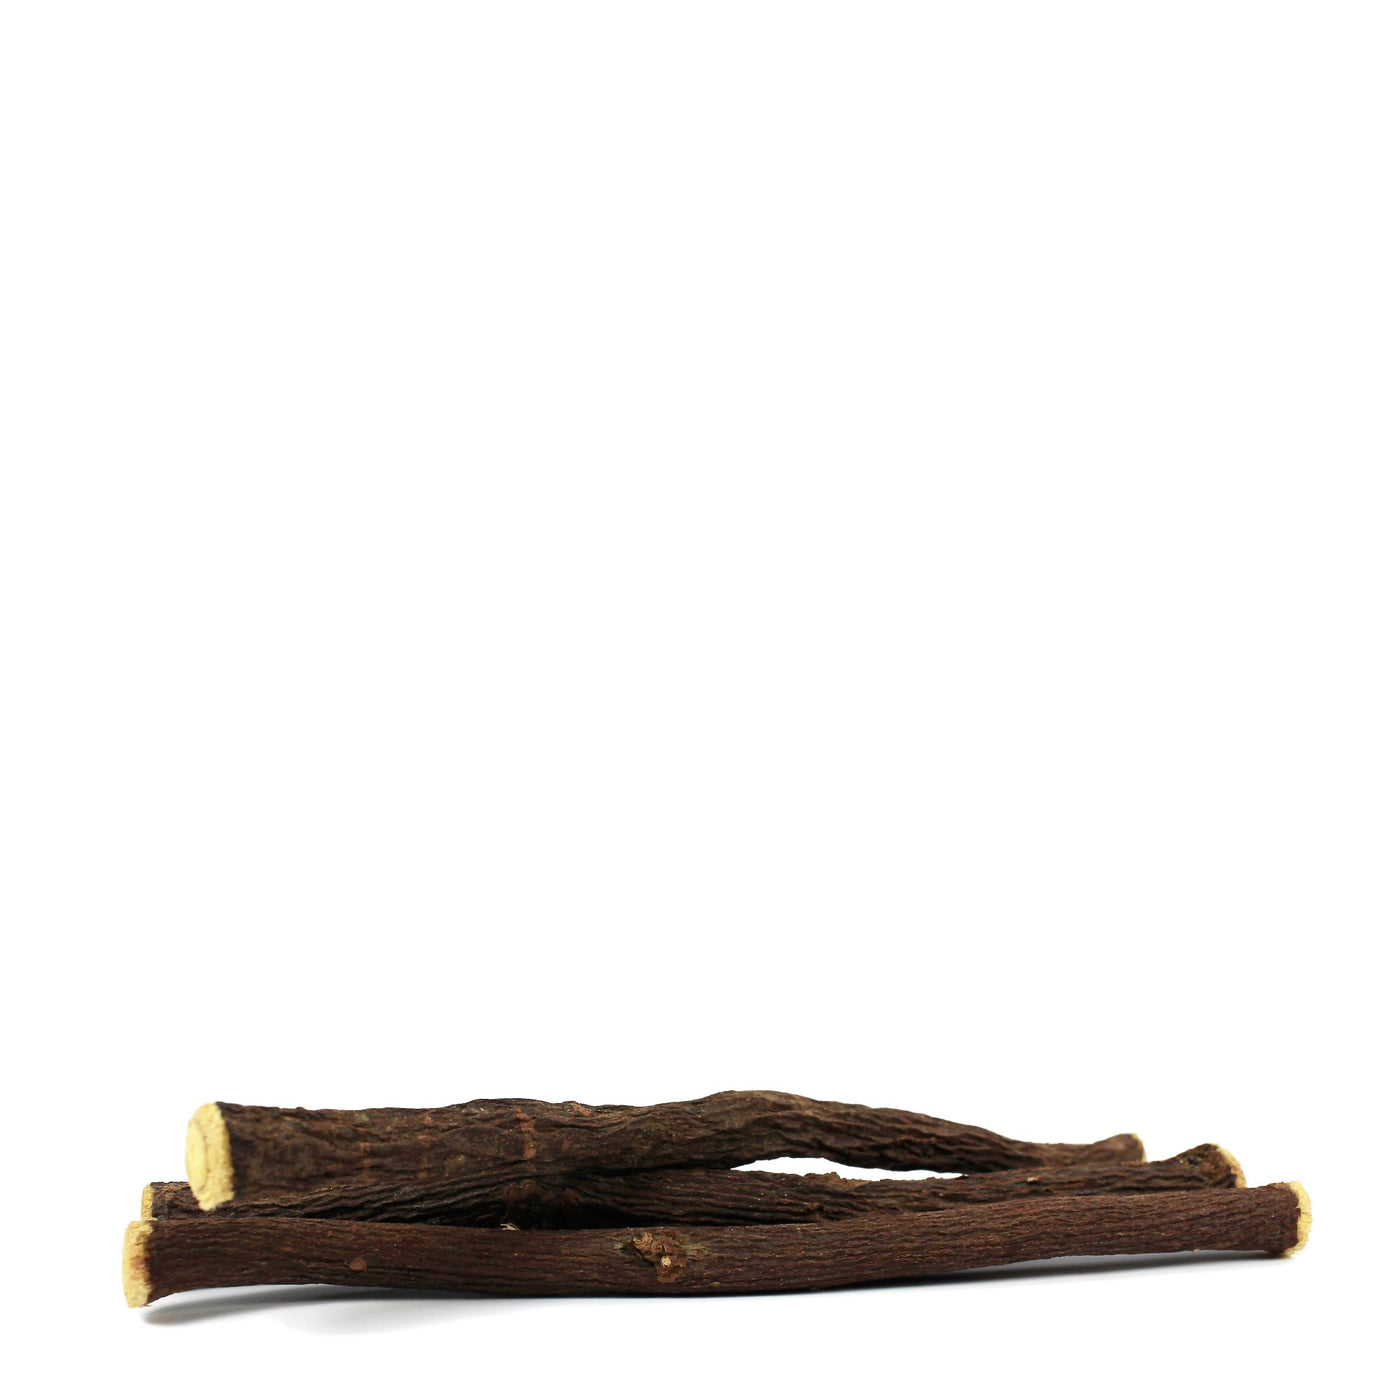 Amarelli Radici - Liquorice Root from Calabria, Italy (195g Pouch)